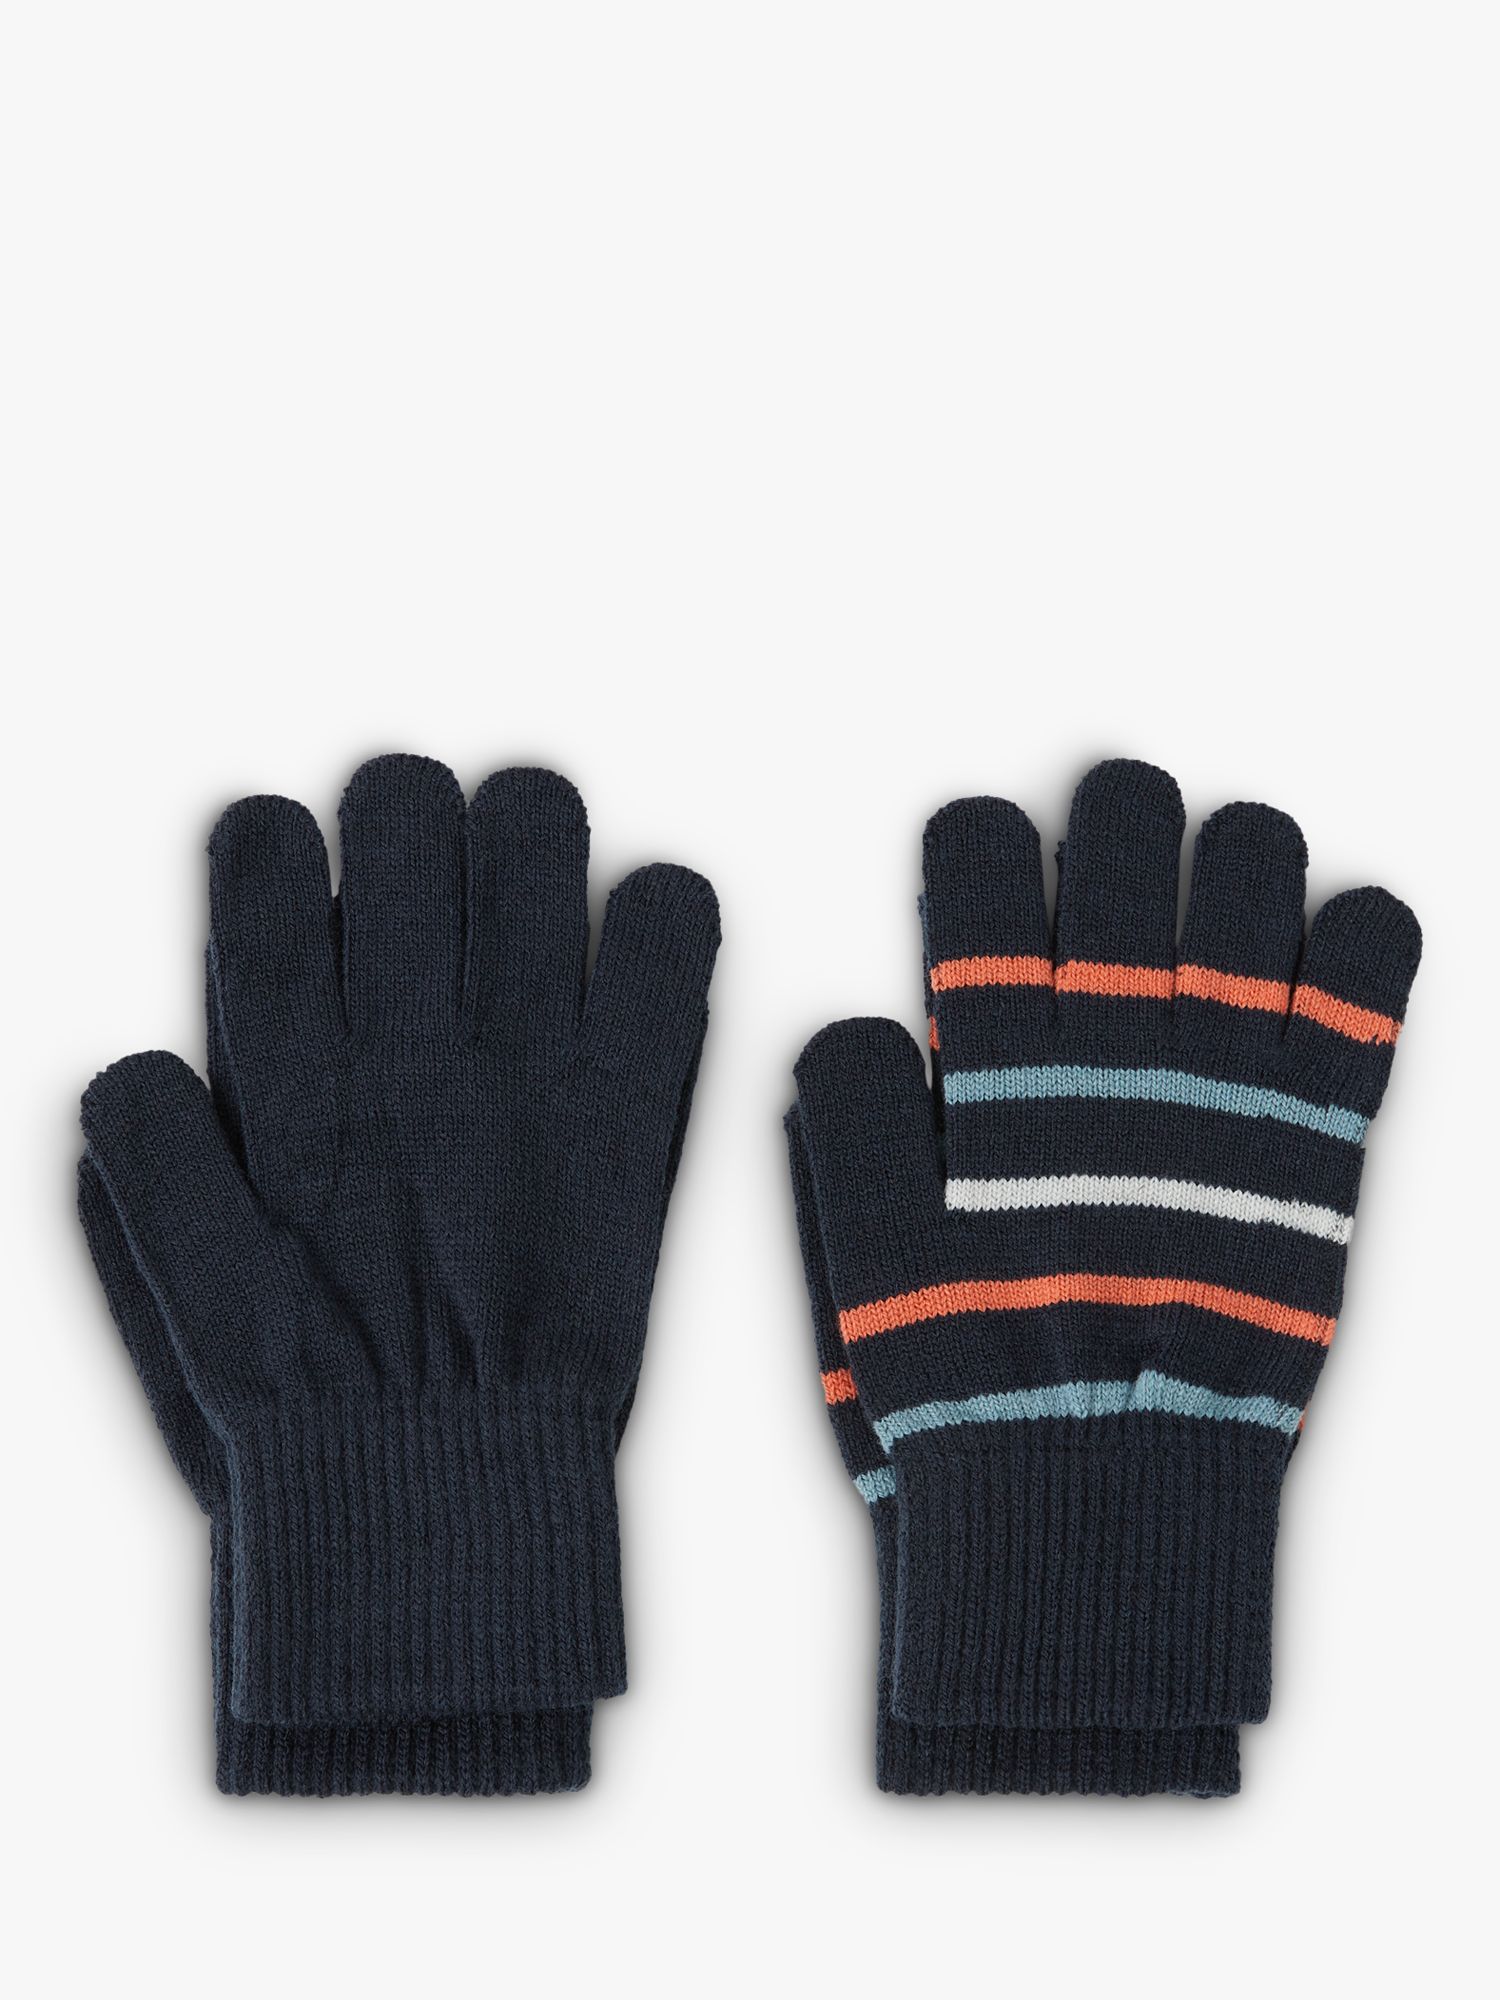 Buy Polarn O. Pyret Kids' Magic Mittens, Pack of 2 Online at johnlewis.com